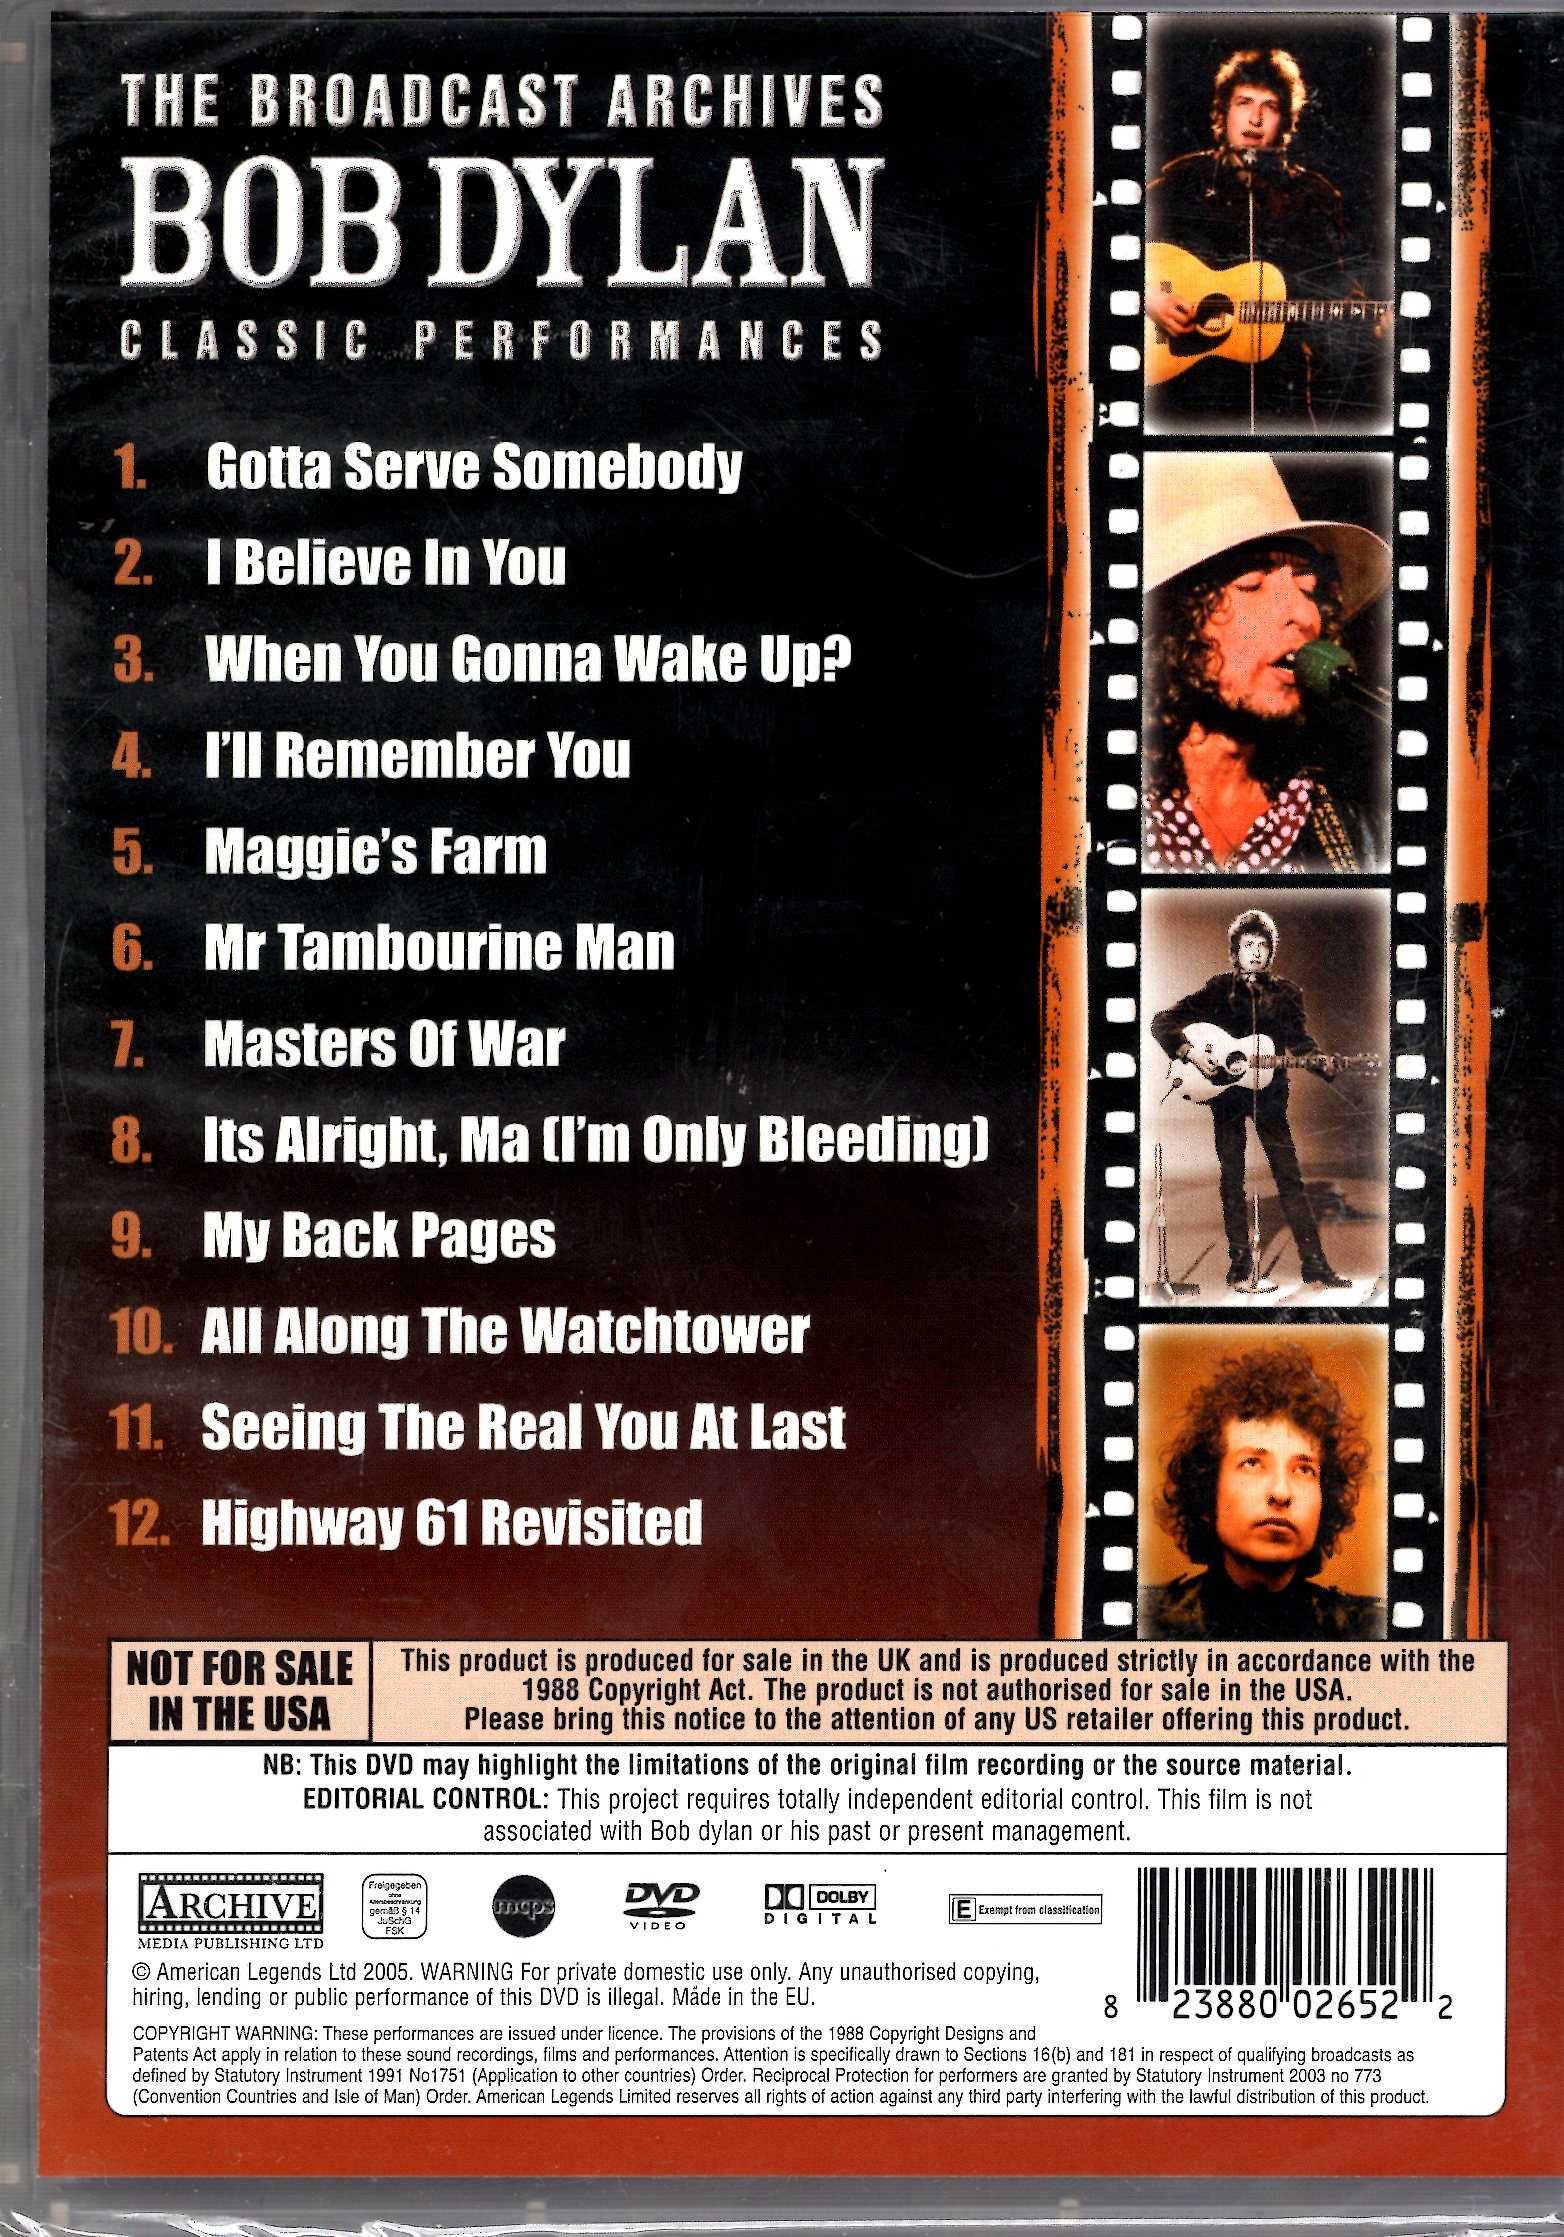 Bob Dylan - Classic Performances. The Broadcast Archives Dvd